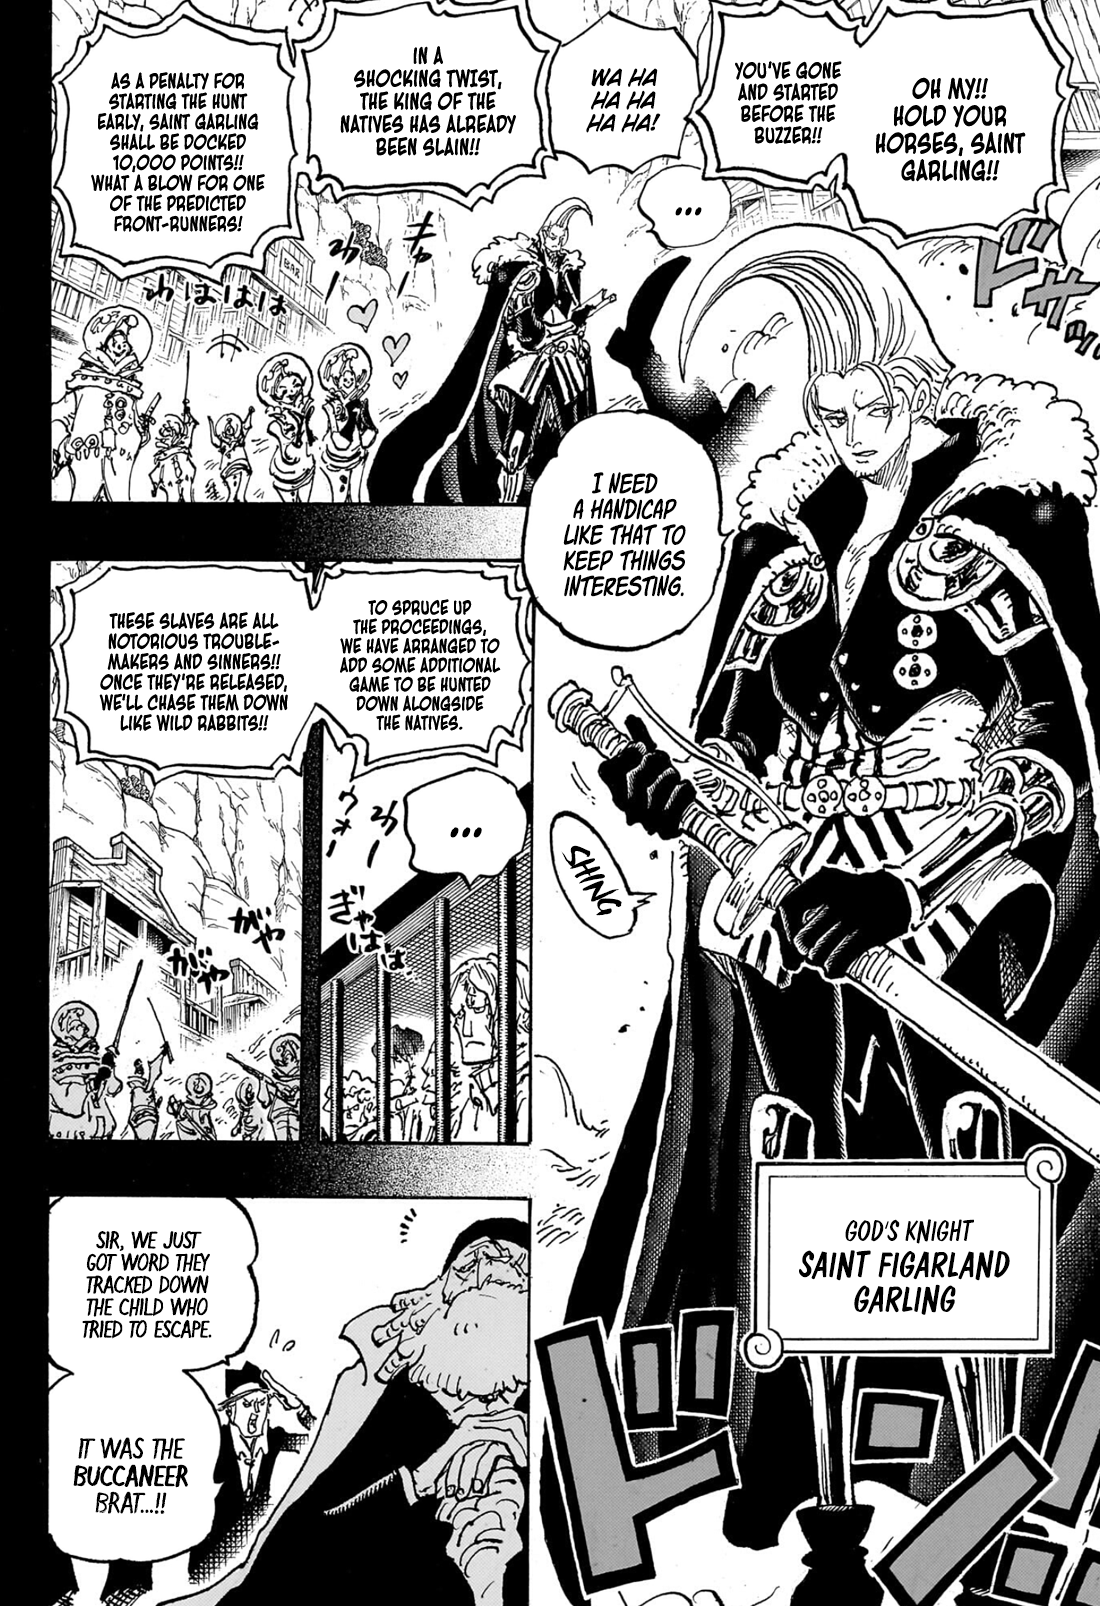 One Piece, Chapter 1095 | TcbScans Org - Free Manga Online in High 